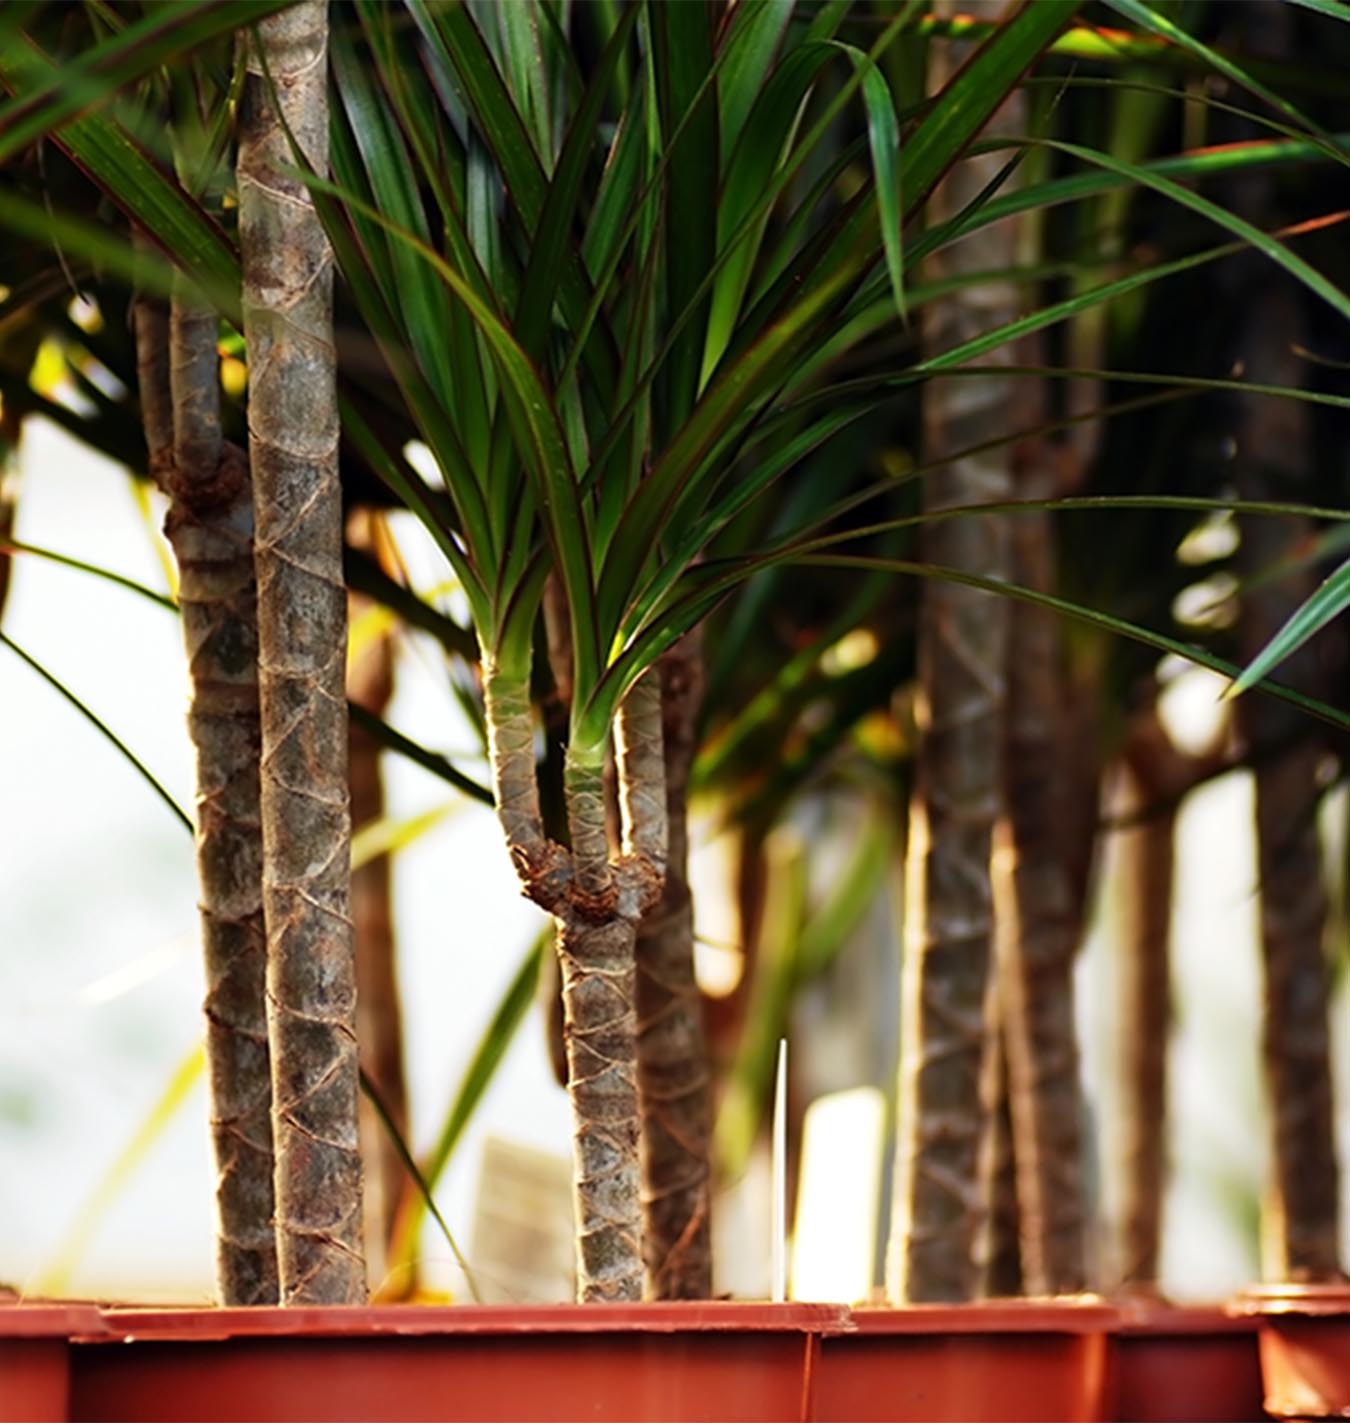 How to care for dragon tree